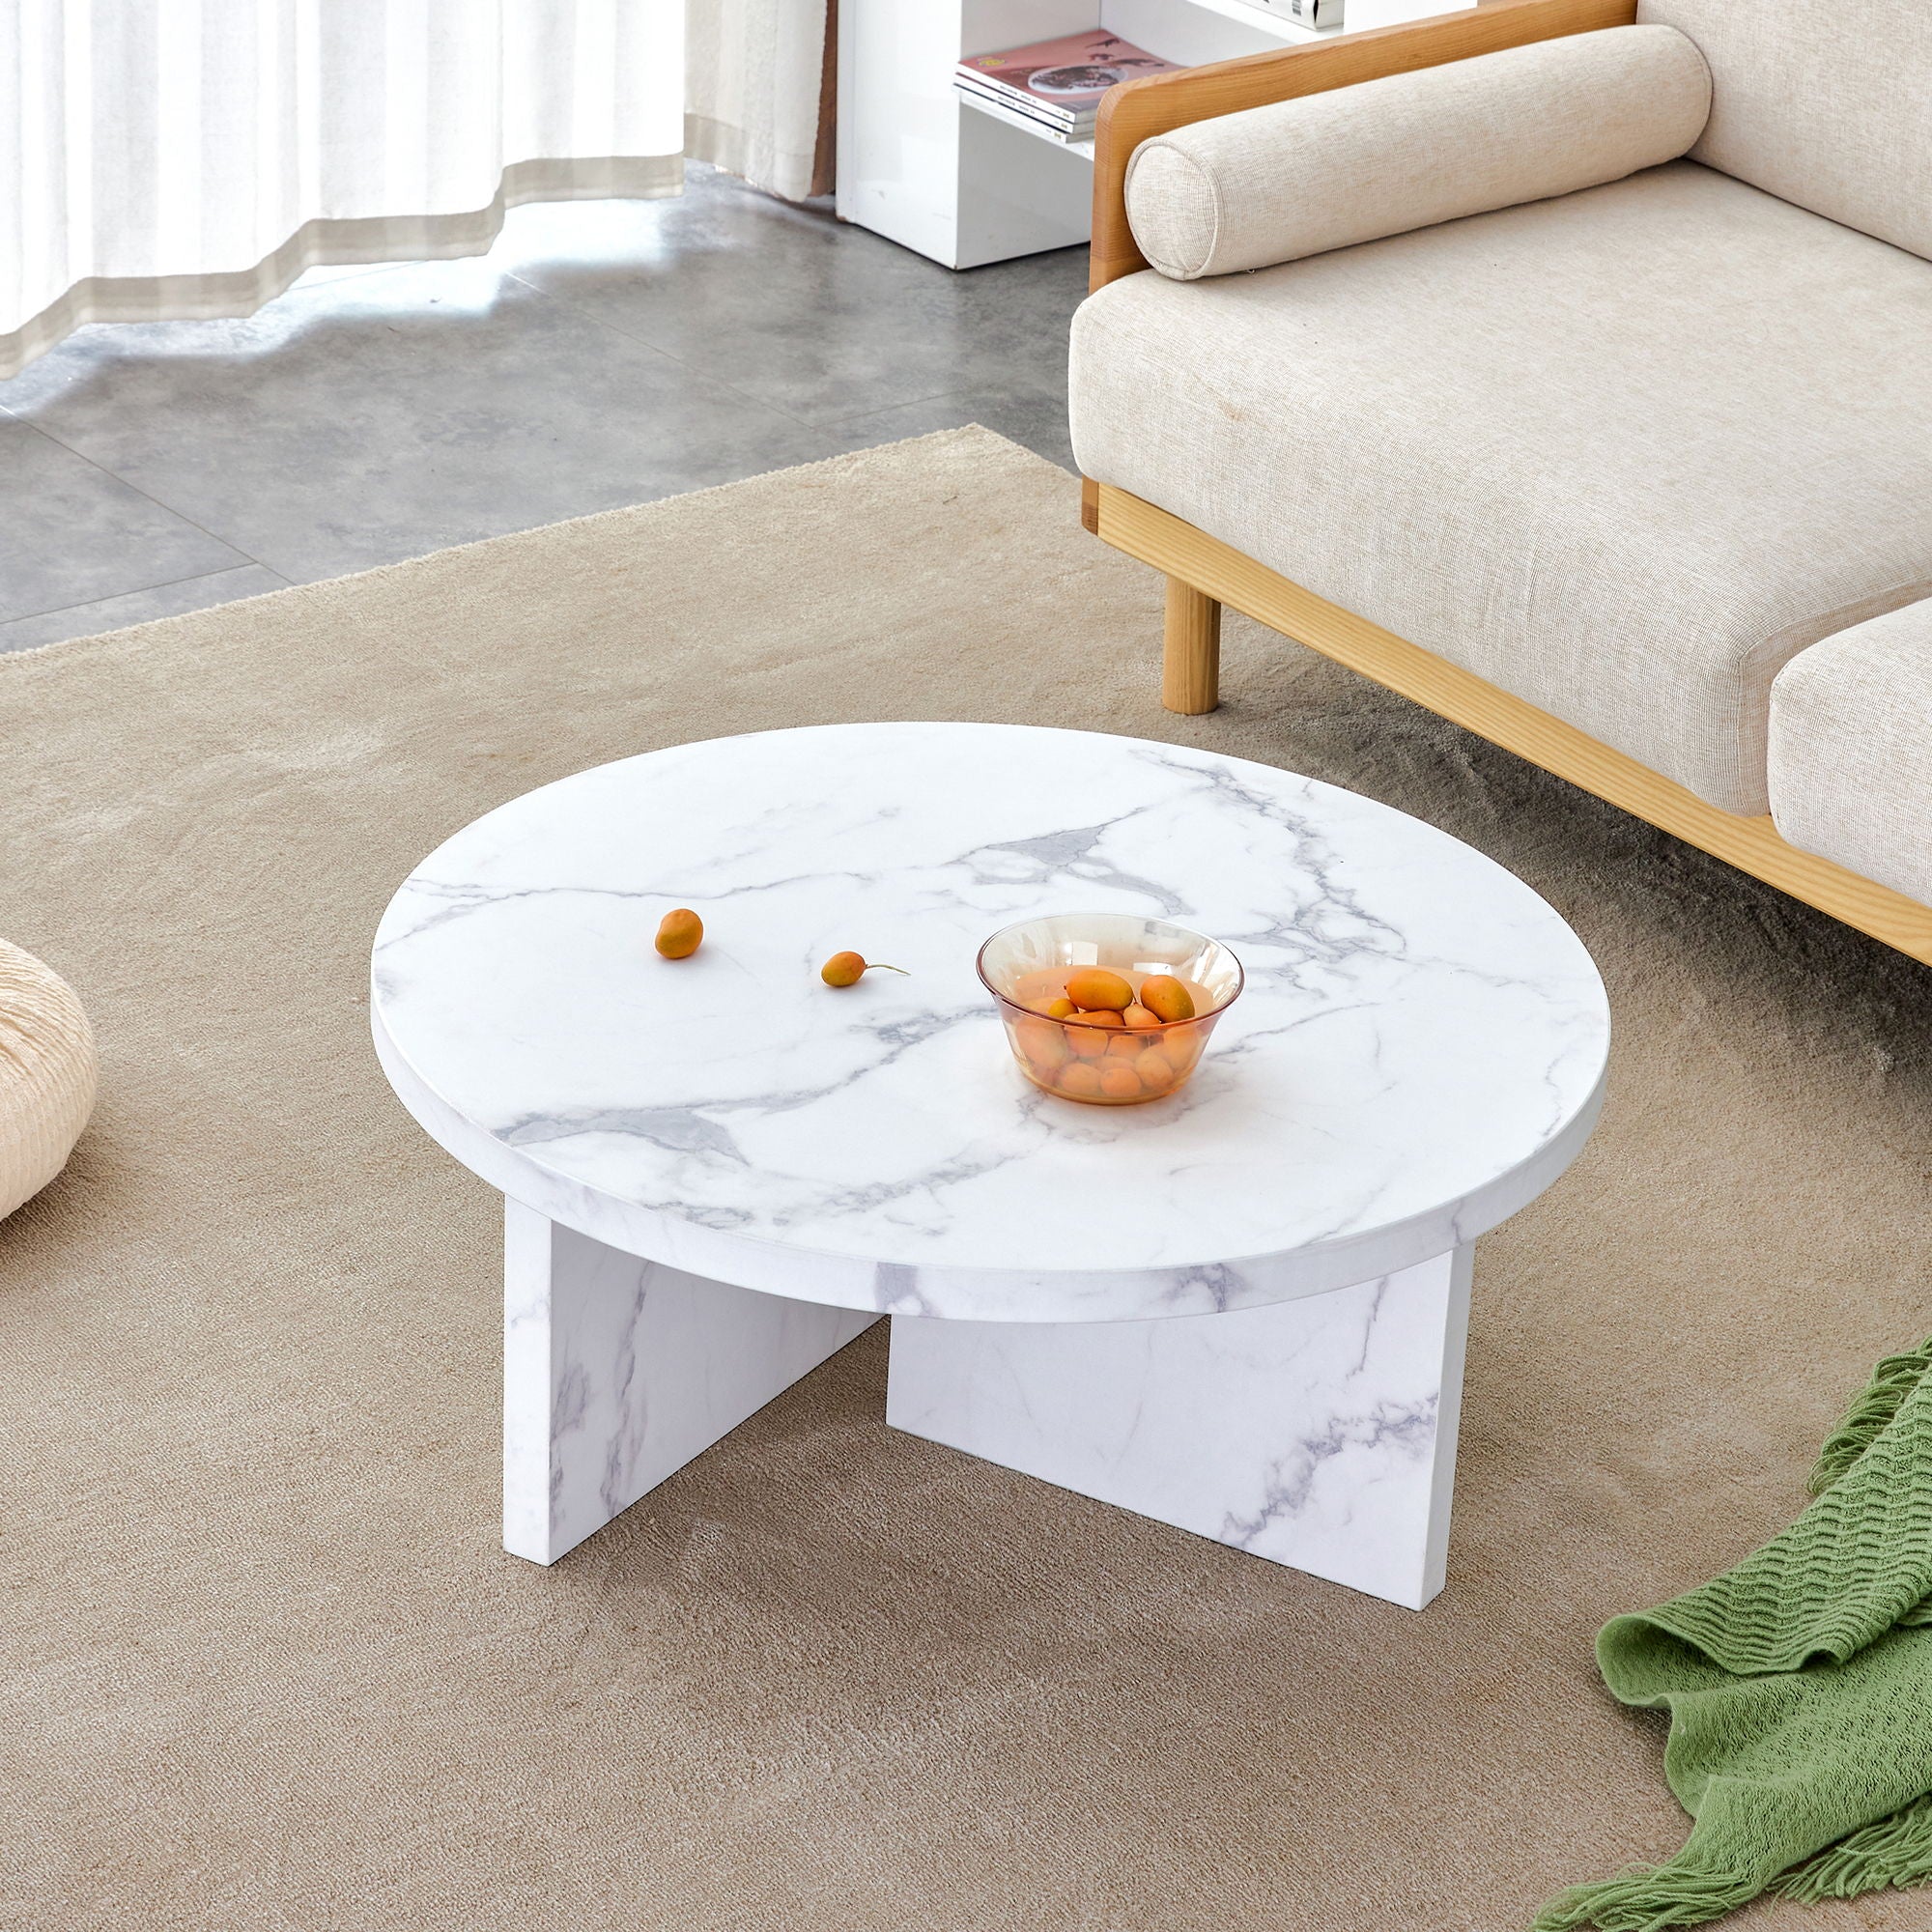 A White MDF Material Circular Patterned Coffee Table, White Center Table, Modern Coffee Table, Suitable For Small Spaces And Living Rooms